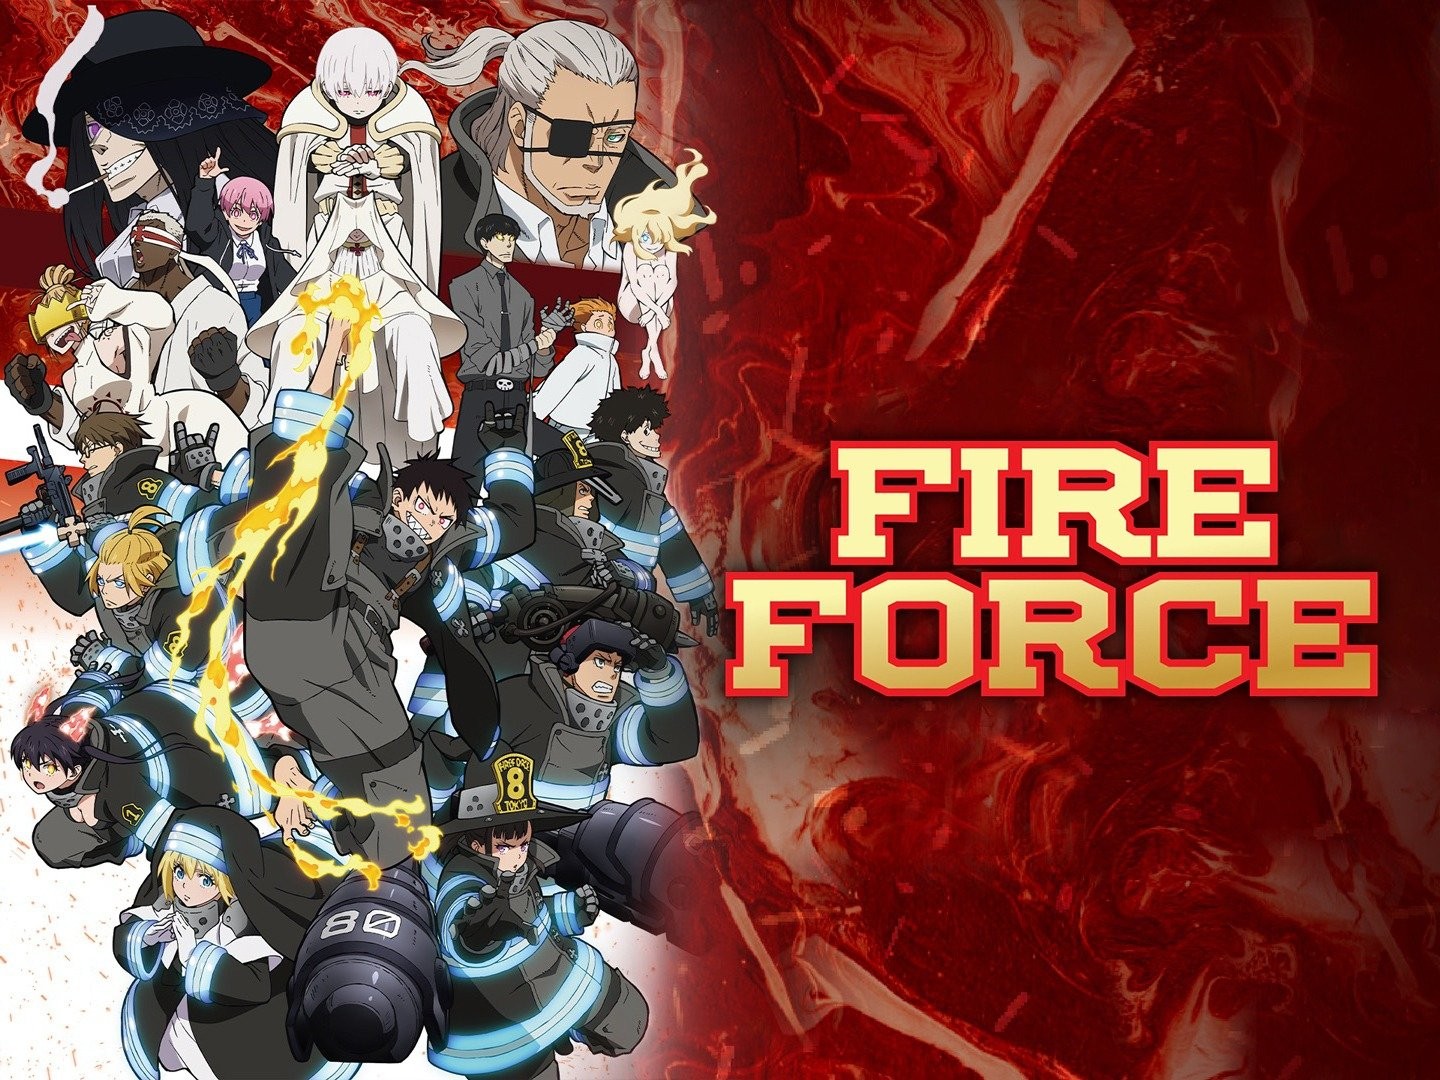 Fire Force S2 - 04 [Groping Through the Fire] - Star Crossed Anime